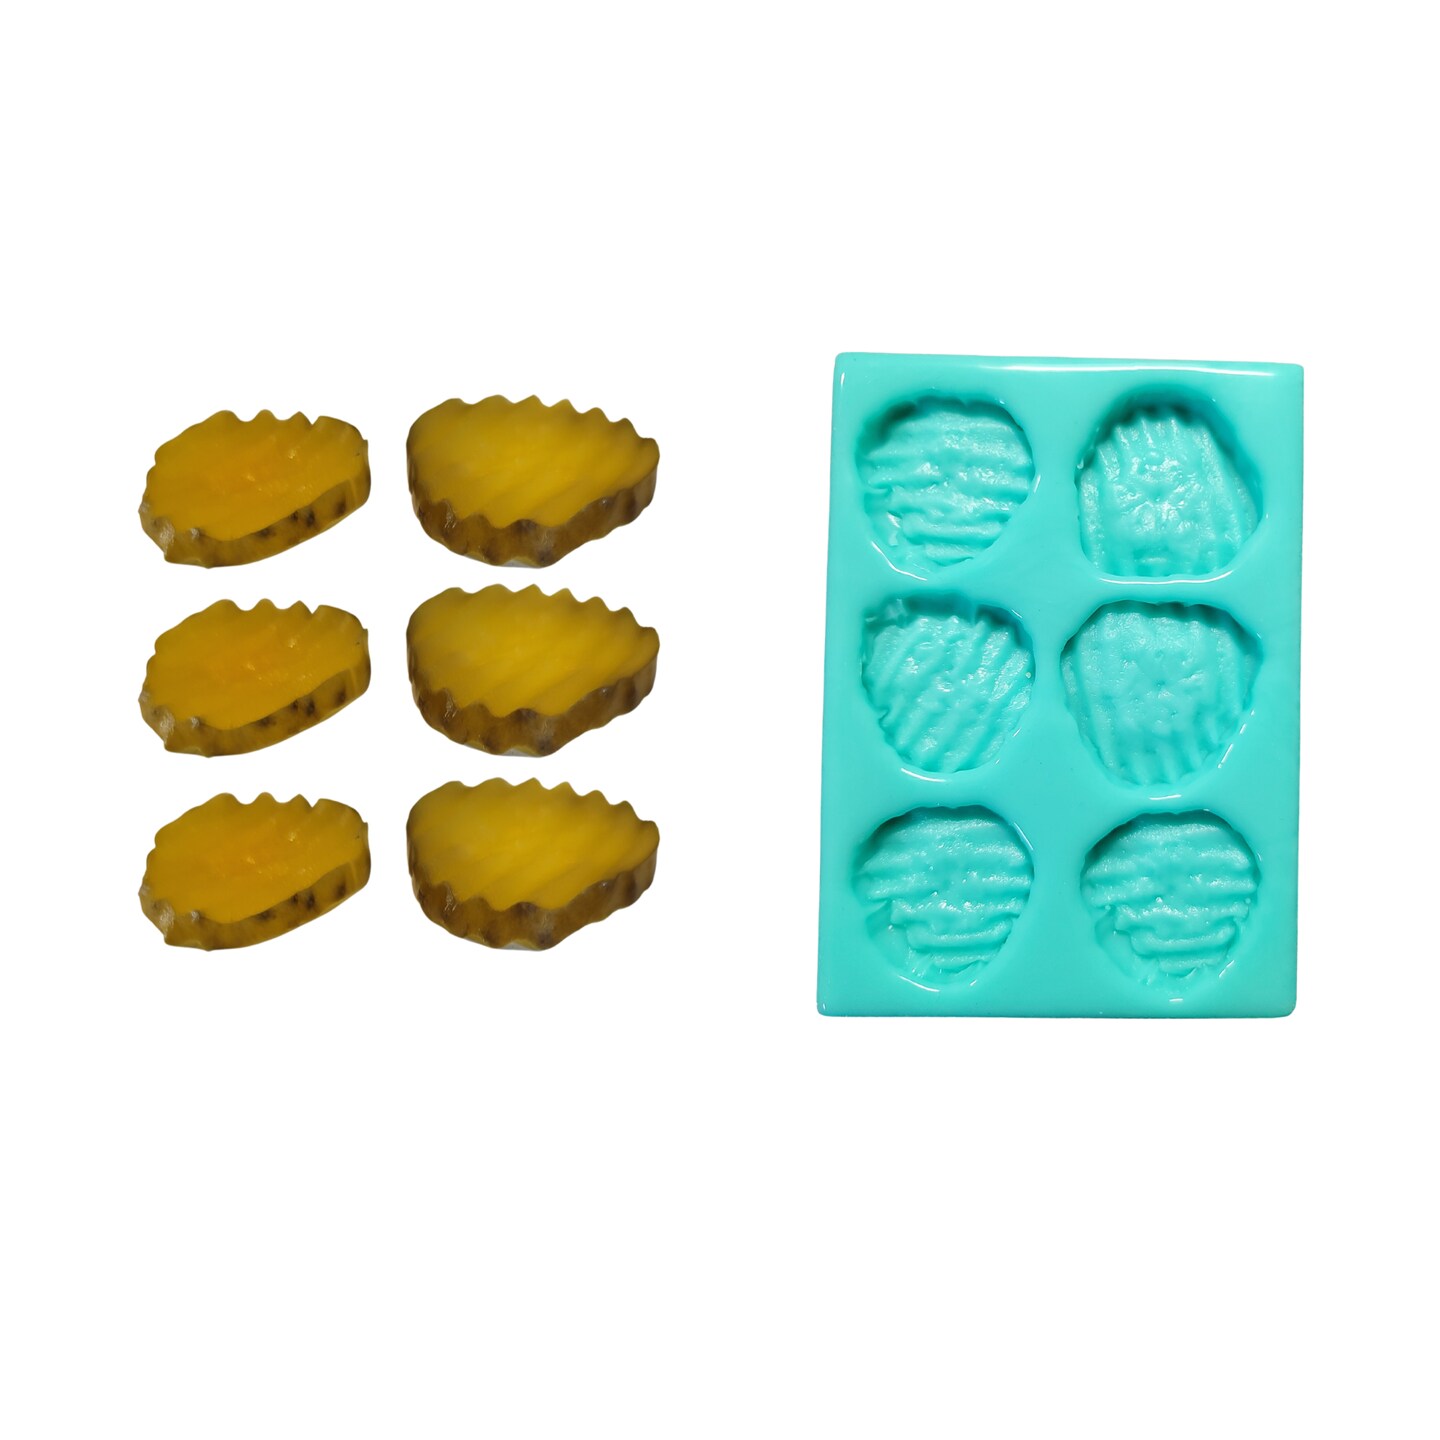 Deconstructed Burger Silicone 5 Mold Combo | Realistic Food Shape For Soap Embeds | Candle Embeds | Wax Melts Silicone Mold| Not Food Grade